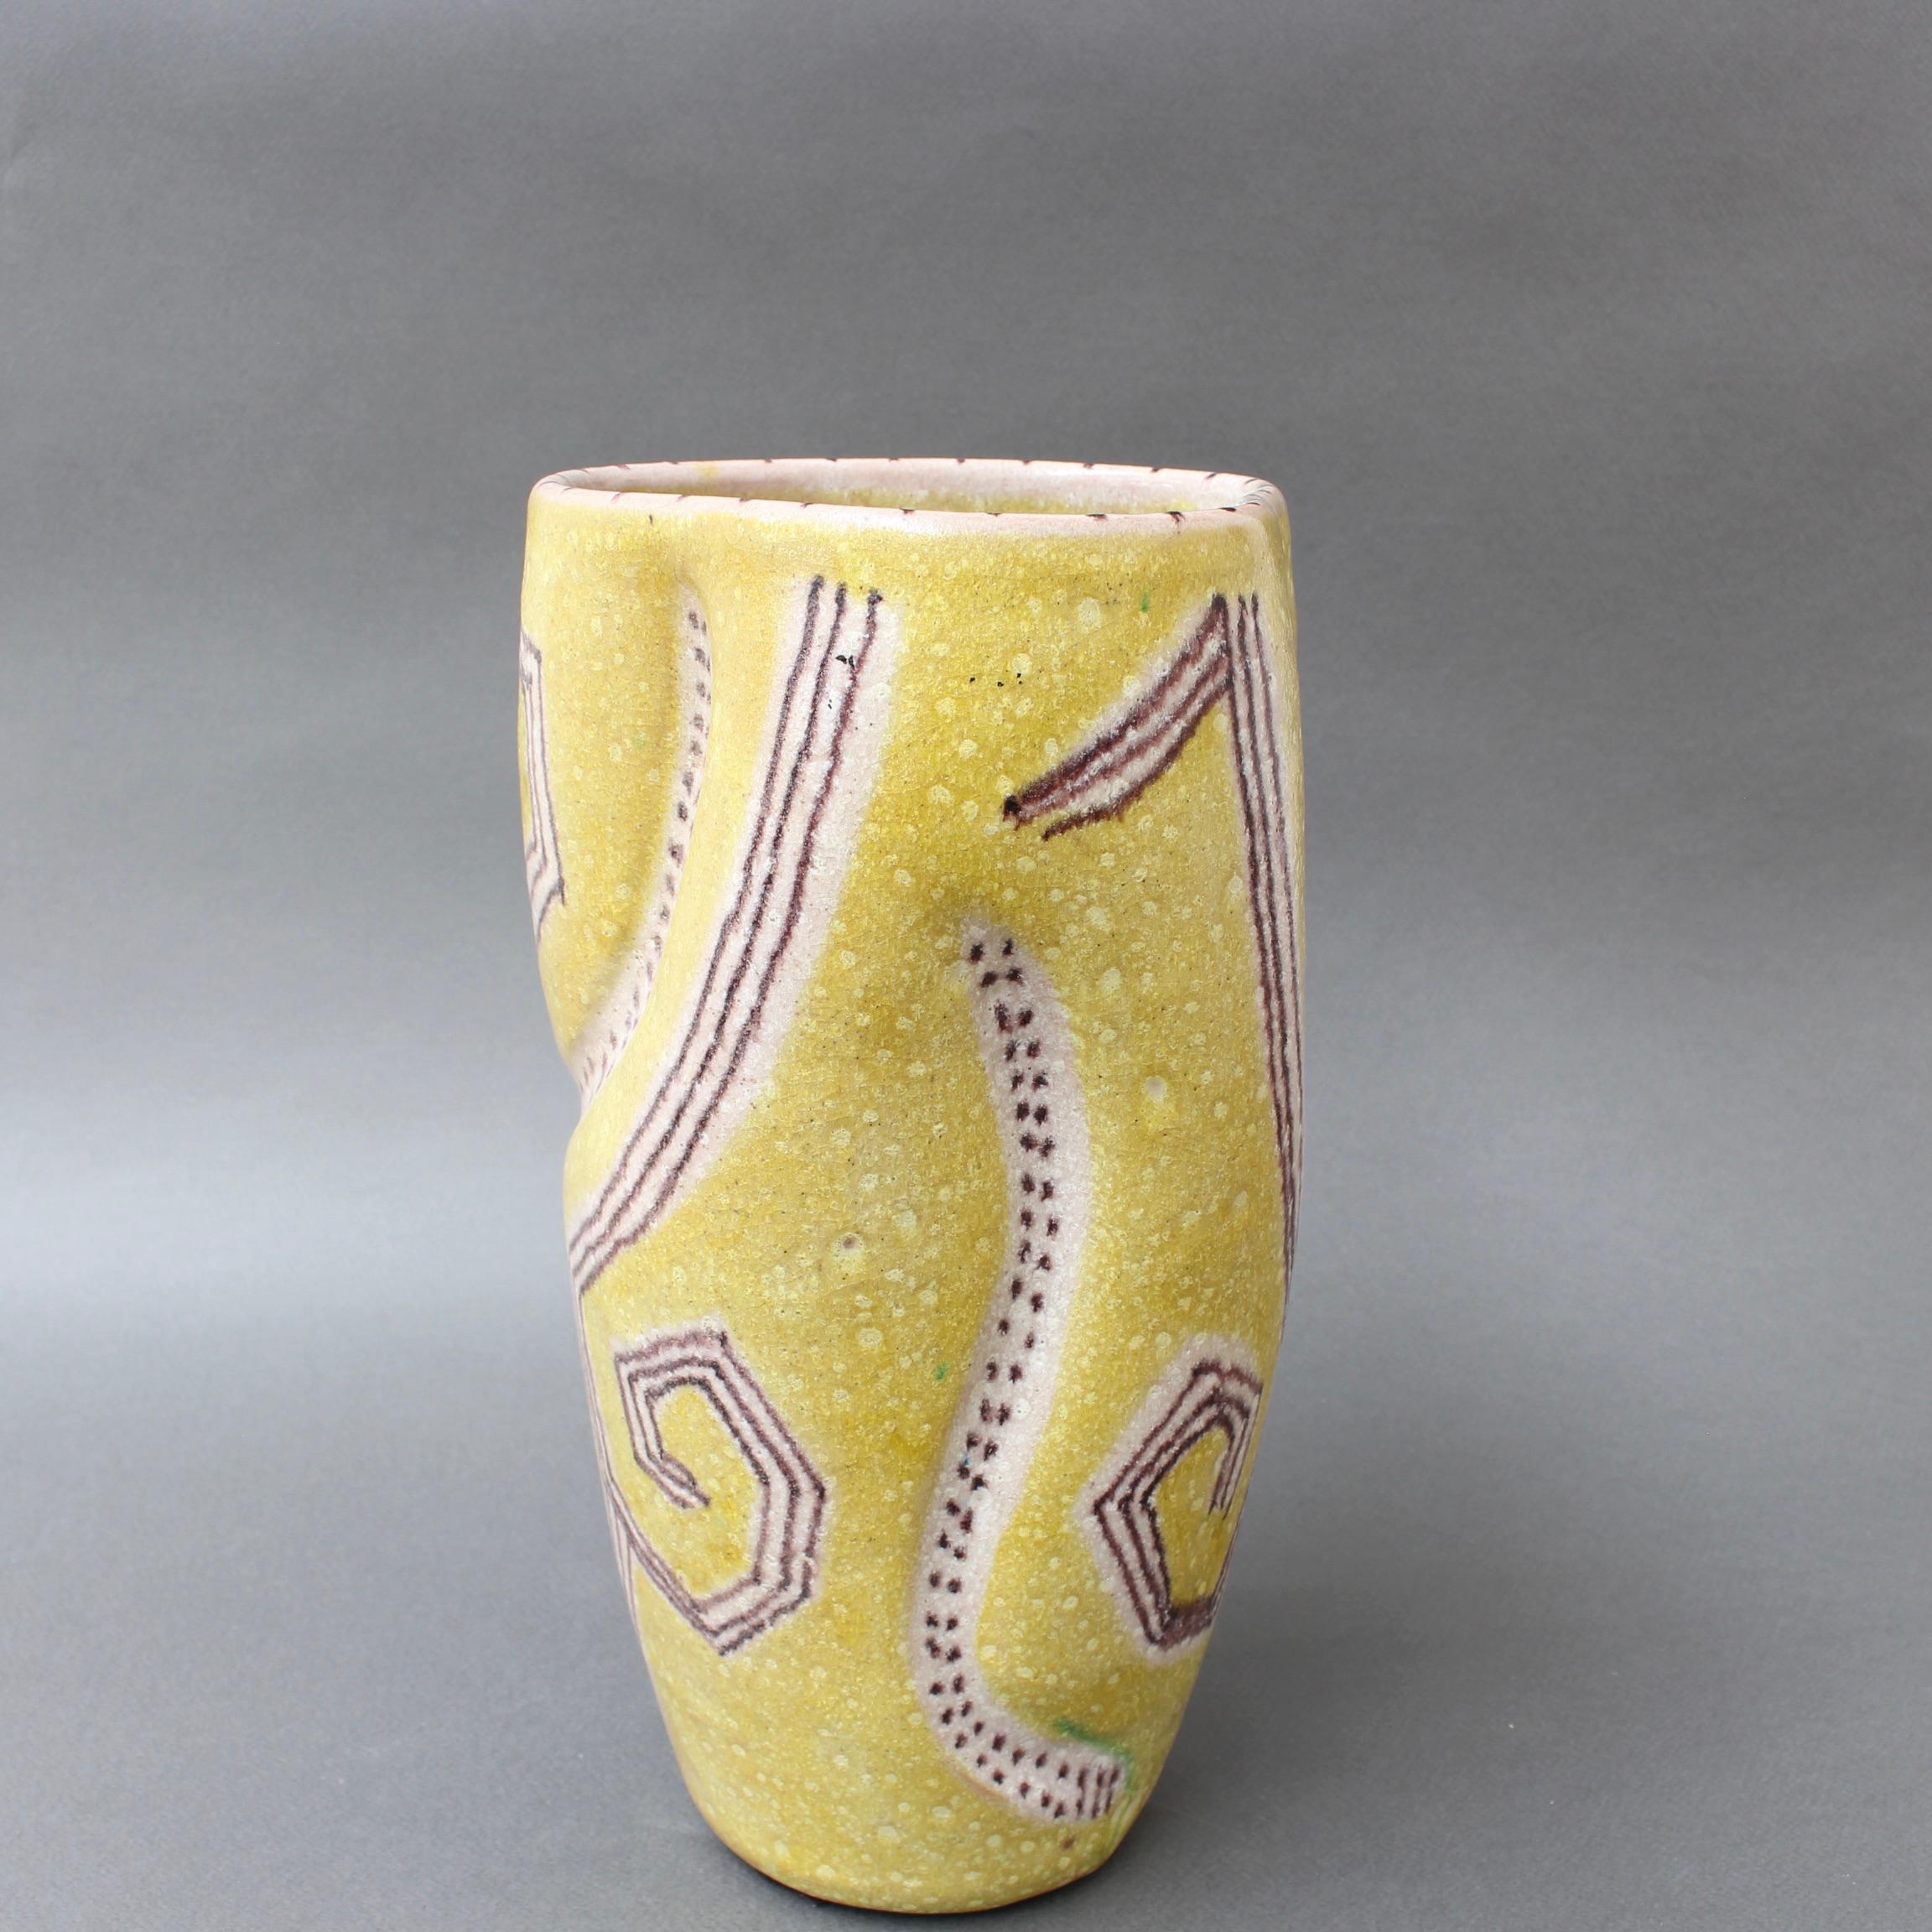 Midcentury Italian ceramic vase with abstract motif by Guido Gambone (circa 1950s). A stunning piece of extraordinary artistry, this is hand painted in a yellow cadmium glaze with brown abstract highlights composed of lines, spots and stripes. Its